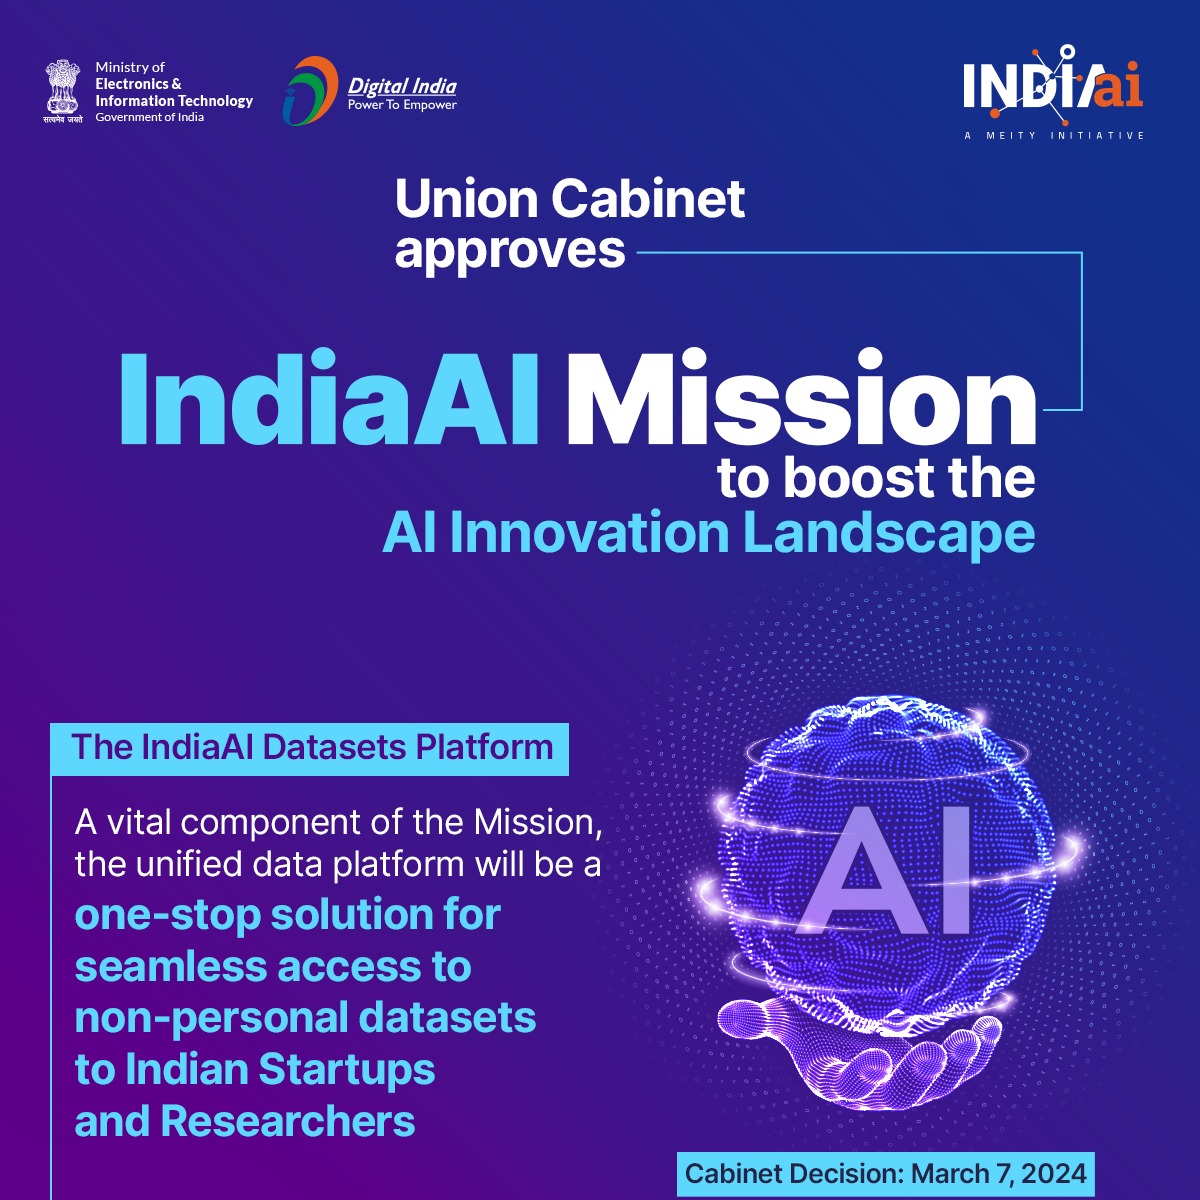 #CabinetDecision | Cabinet's approval of the #IndiaAIMission marks a significant step towards democratising access to crucial resources for AI innovation. The IndiaAI Datasets Platform, a mission cornerstone, is designed to provide a one-stop solution for seamless access to…